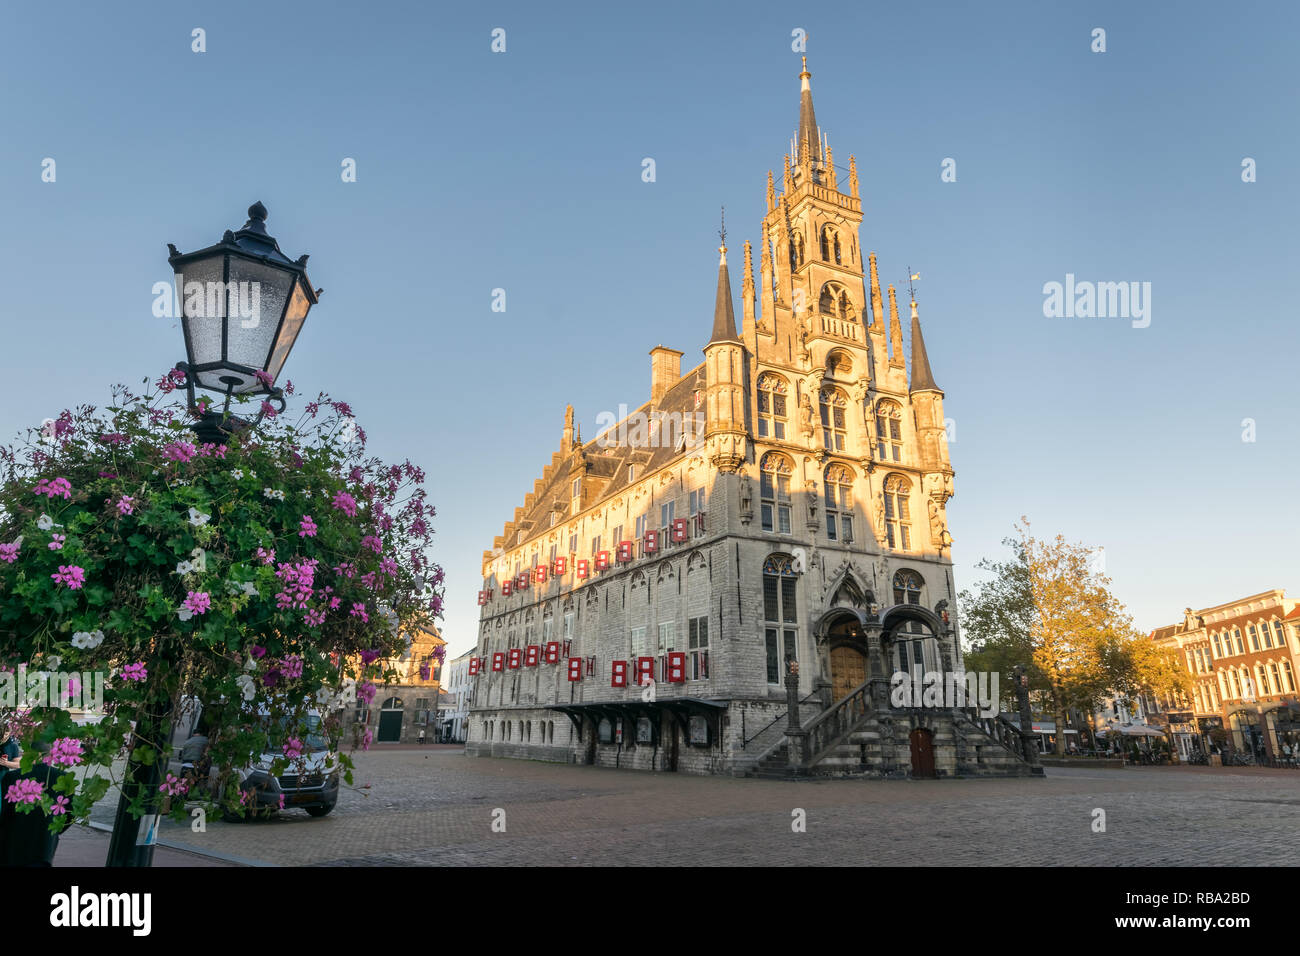 Gothic city hall of Gouda, The Netherlands at sunset. Old City Hall at the Market square - built between 1448 and 1450. Stock Photo